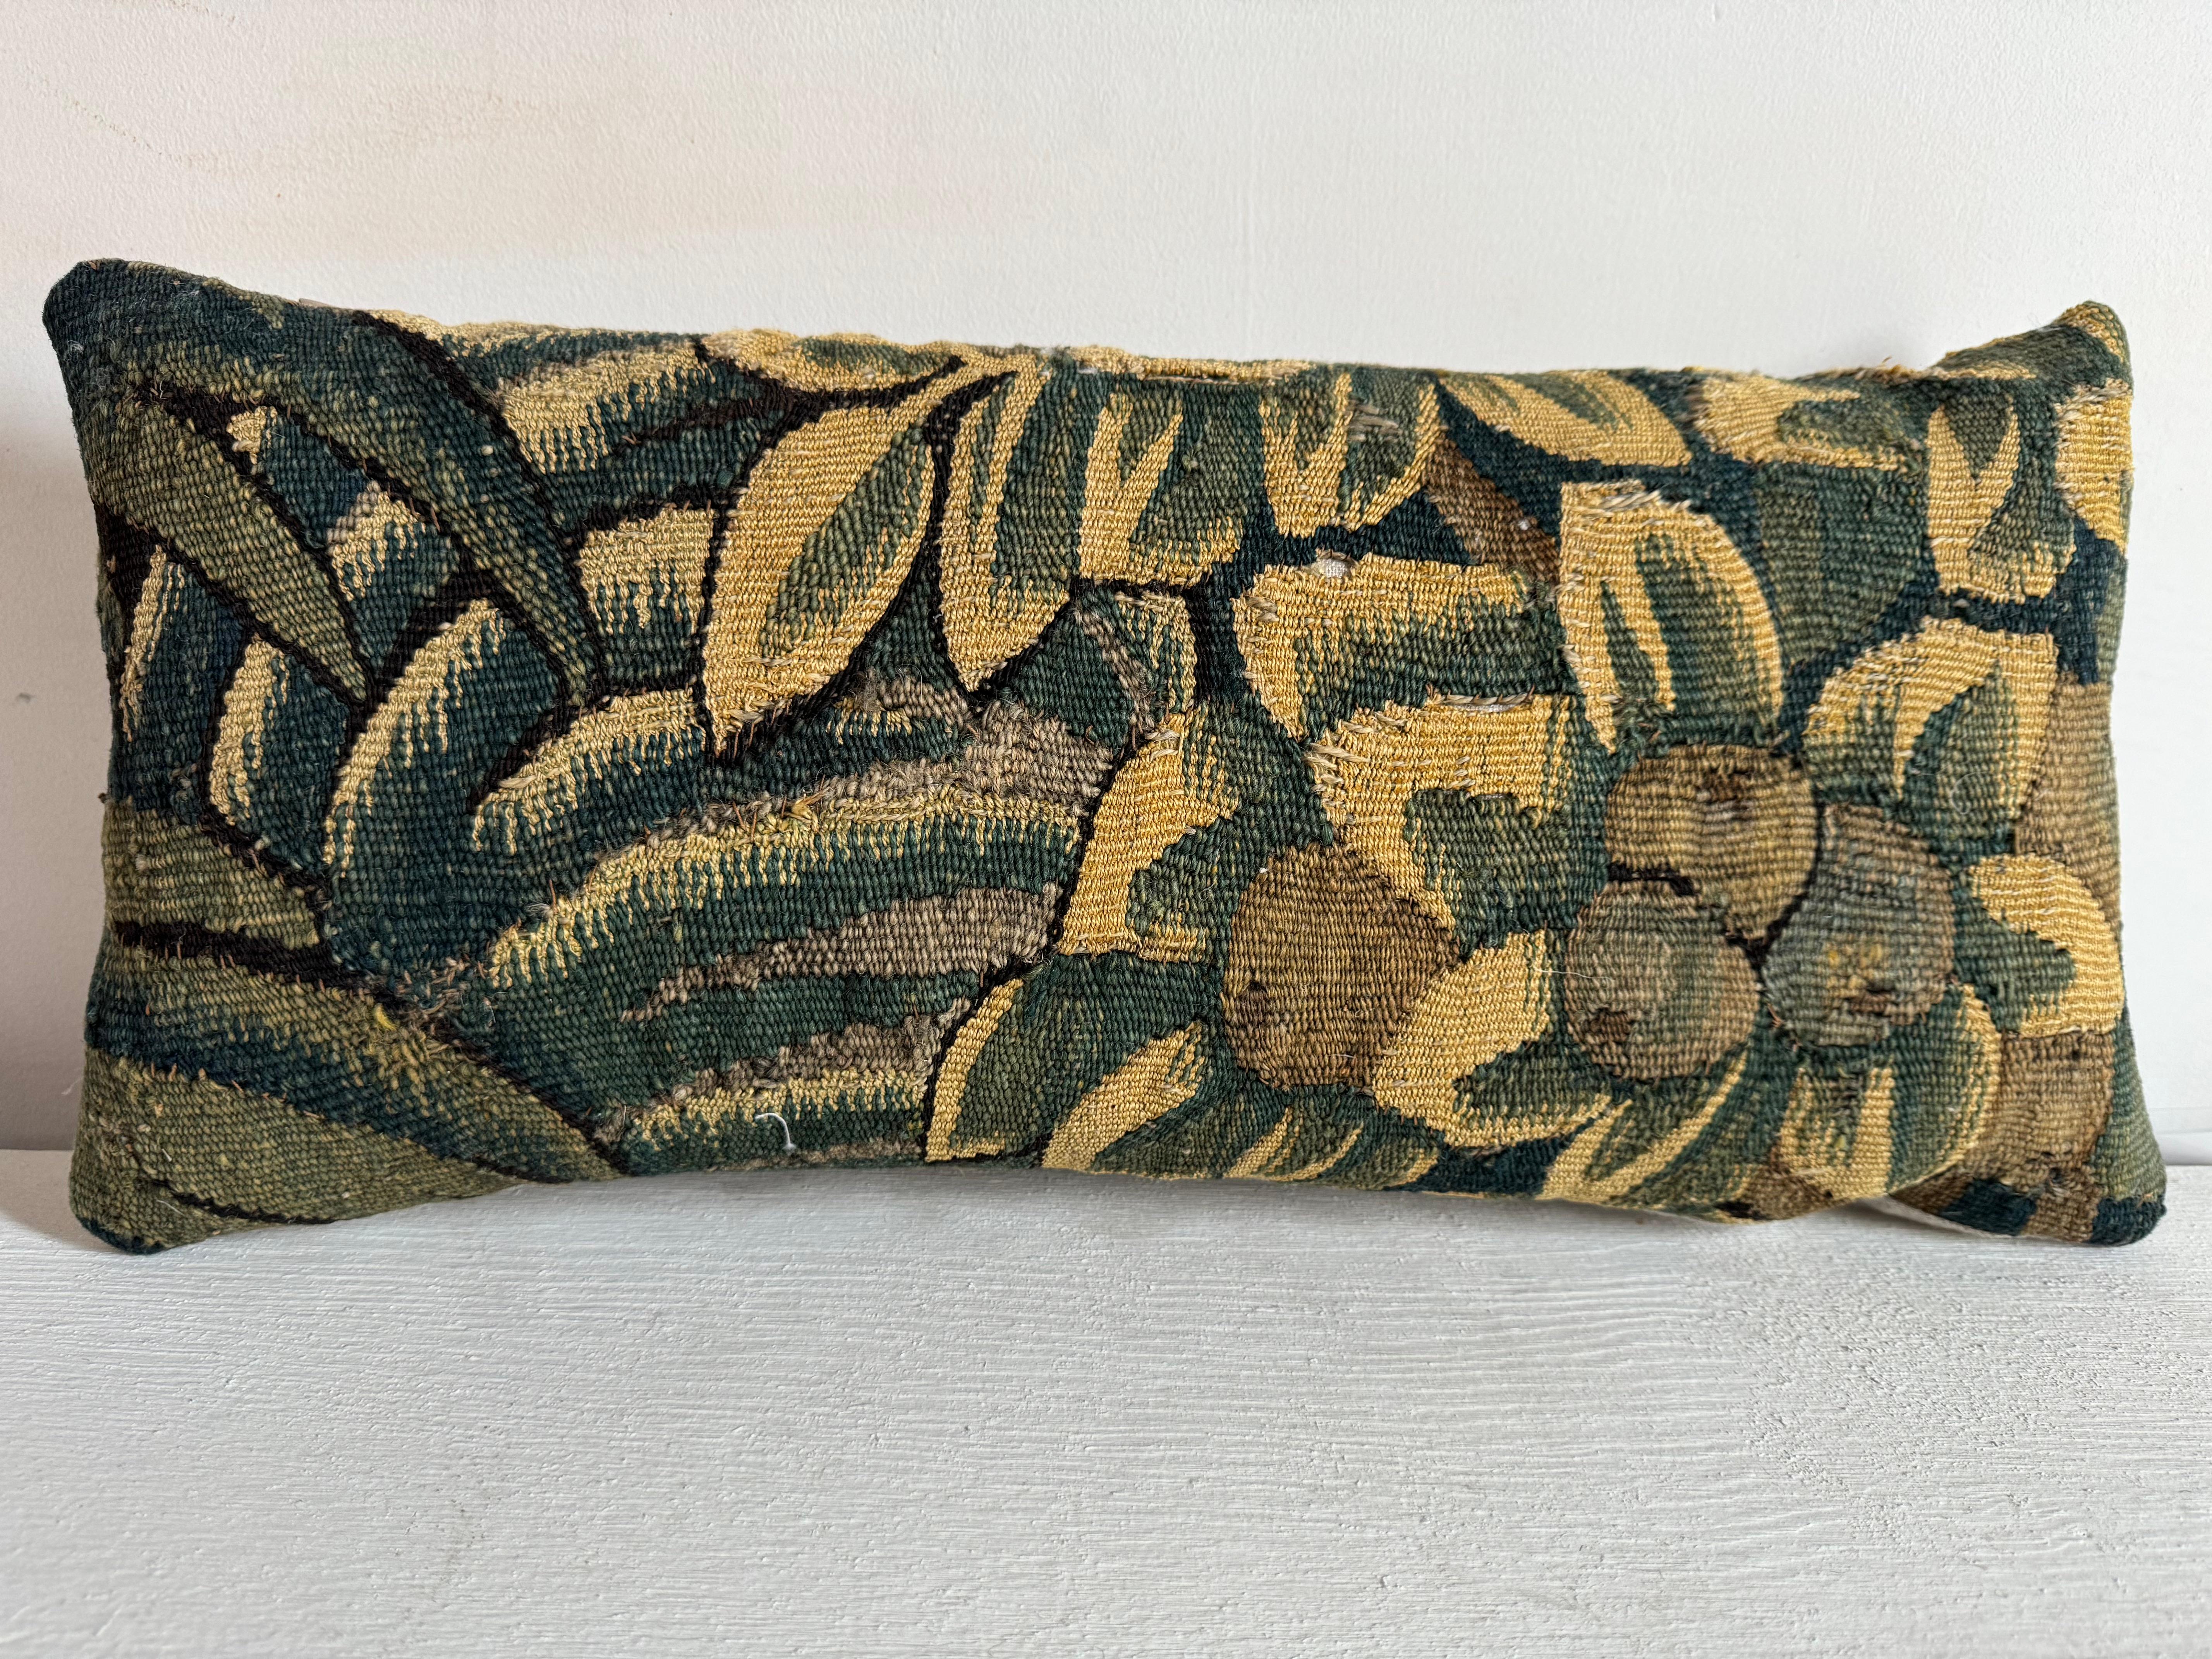 French 17th Century Flemish Pillow - 19